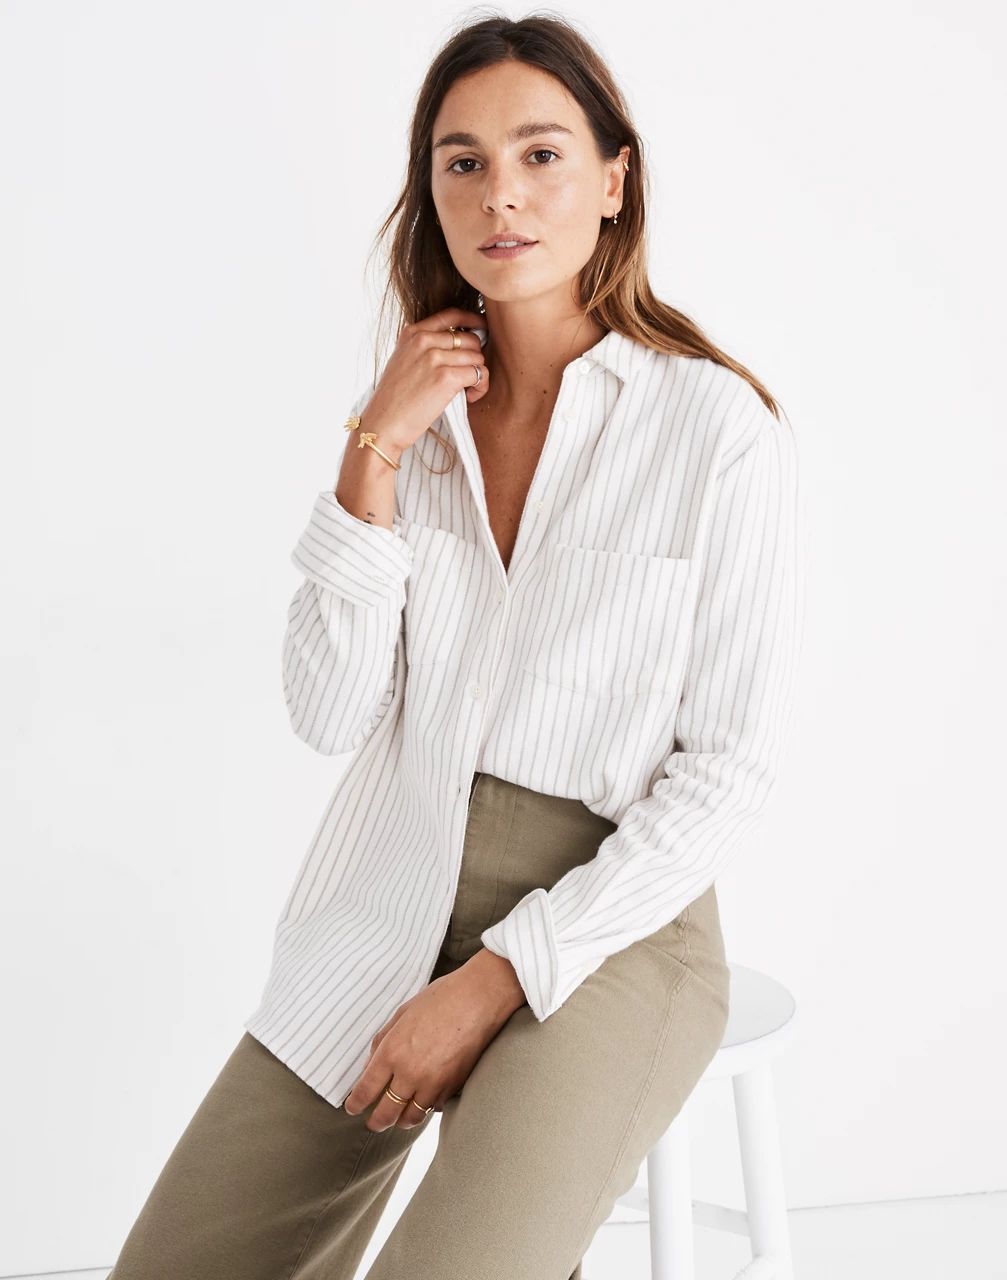 Flannel Sunday Shirt in Stripe | Madewell